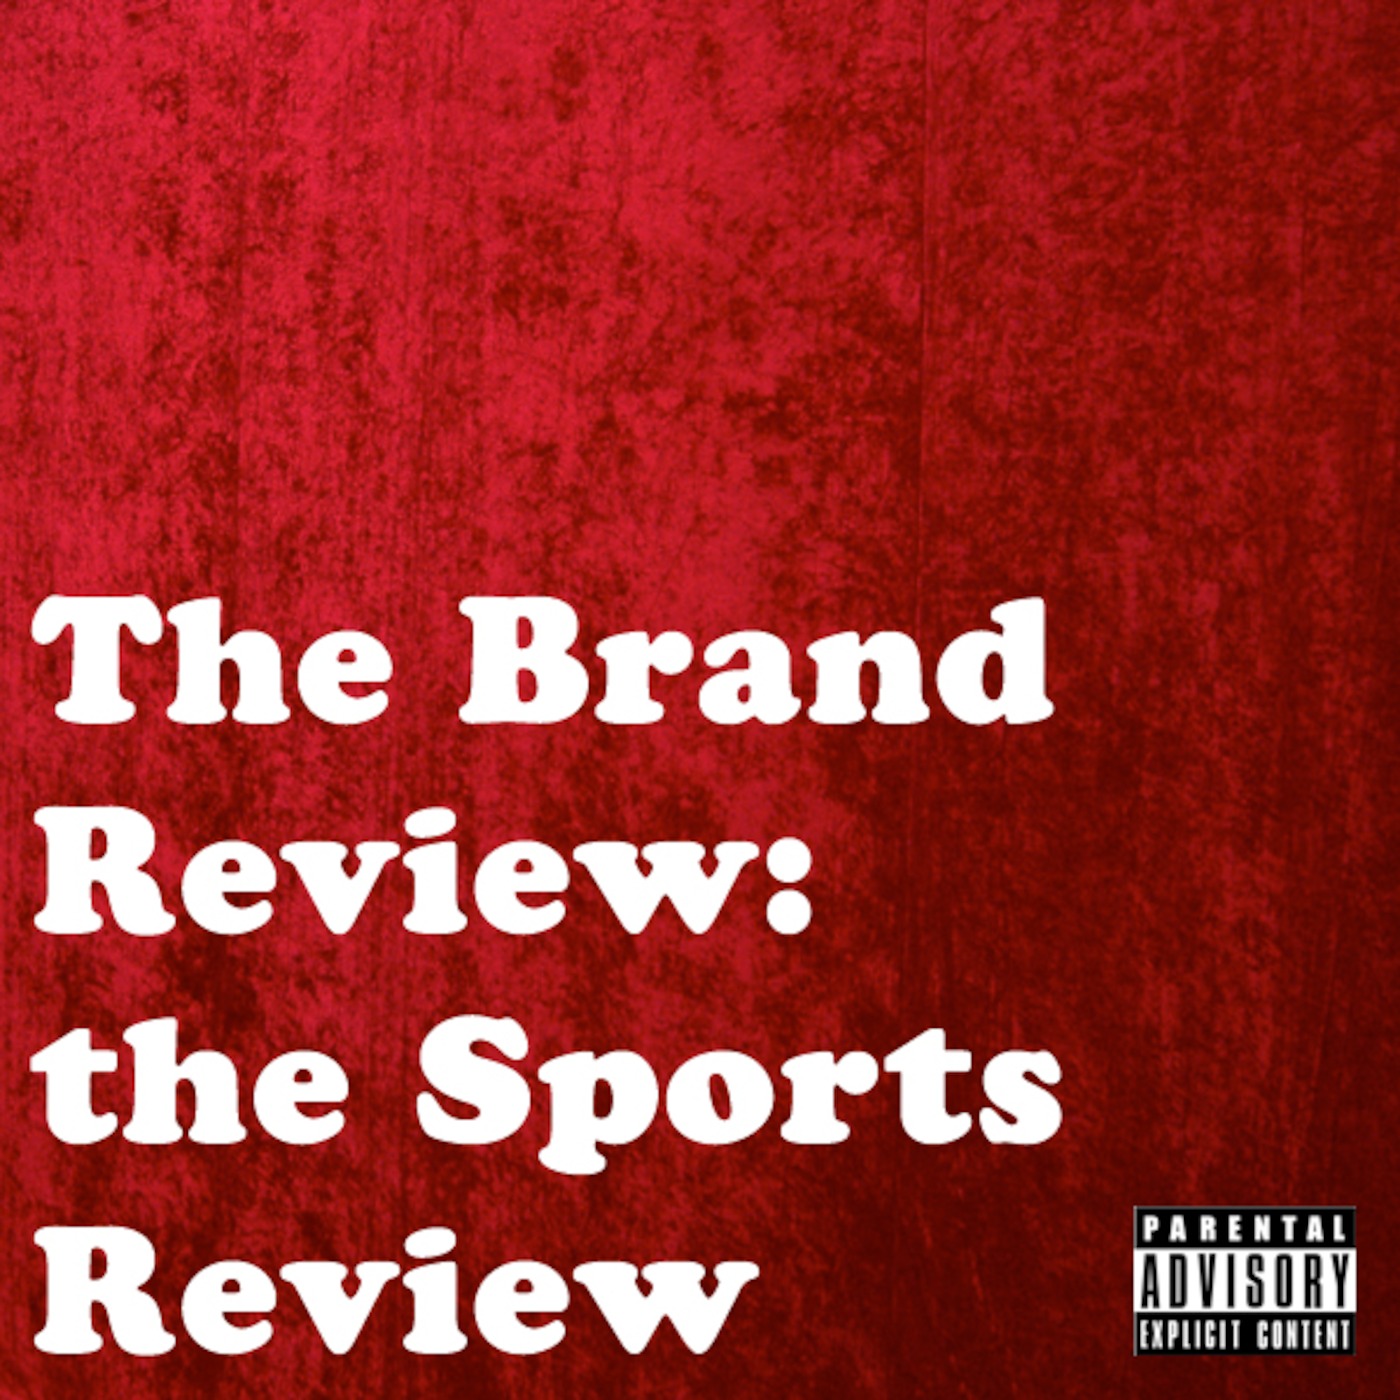 The Brand Review the Sports Review